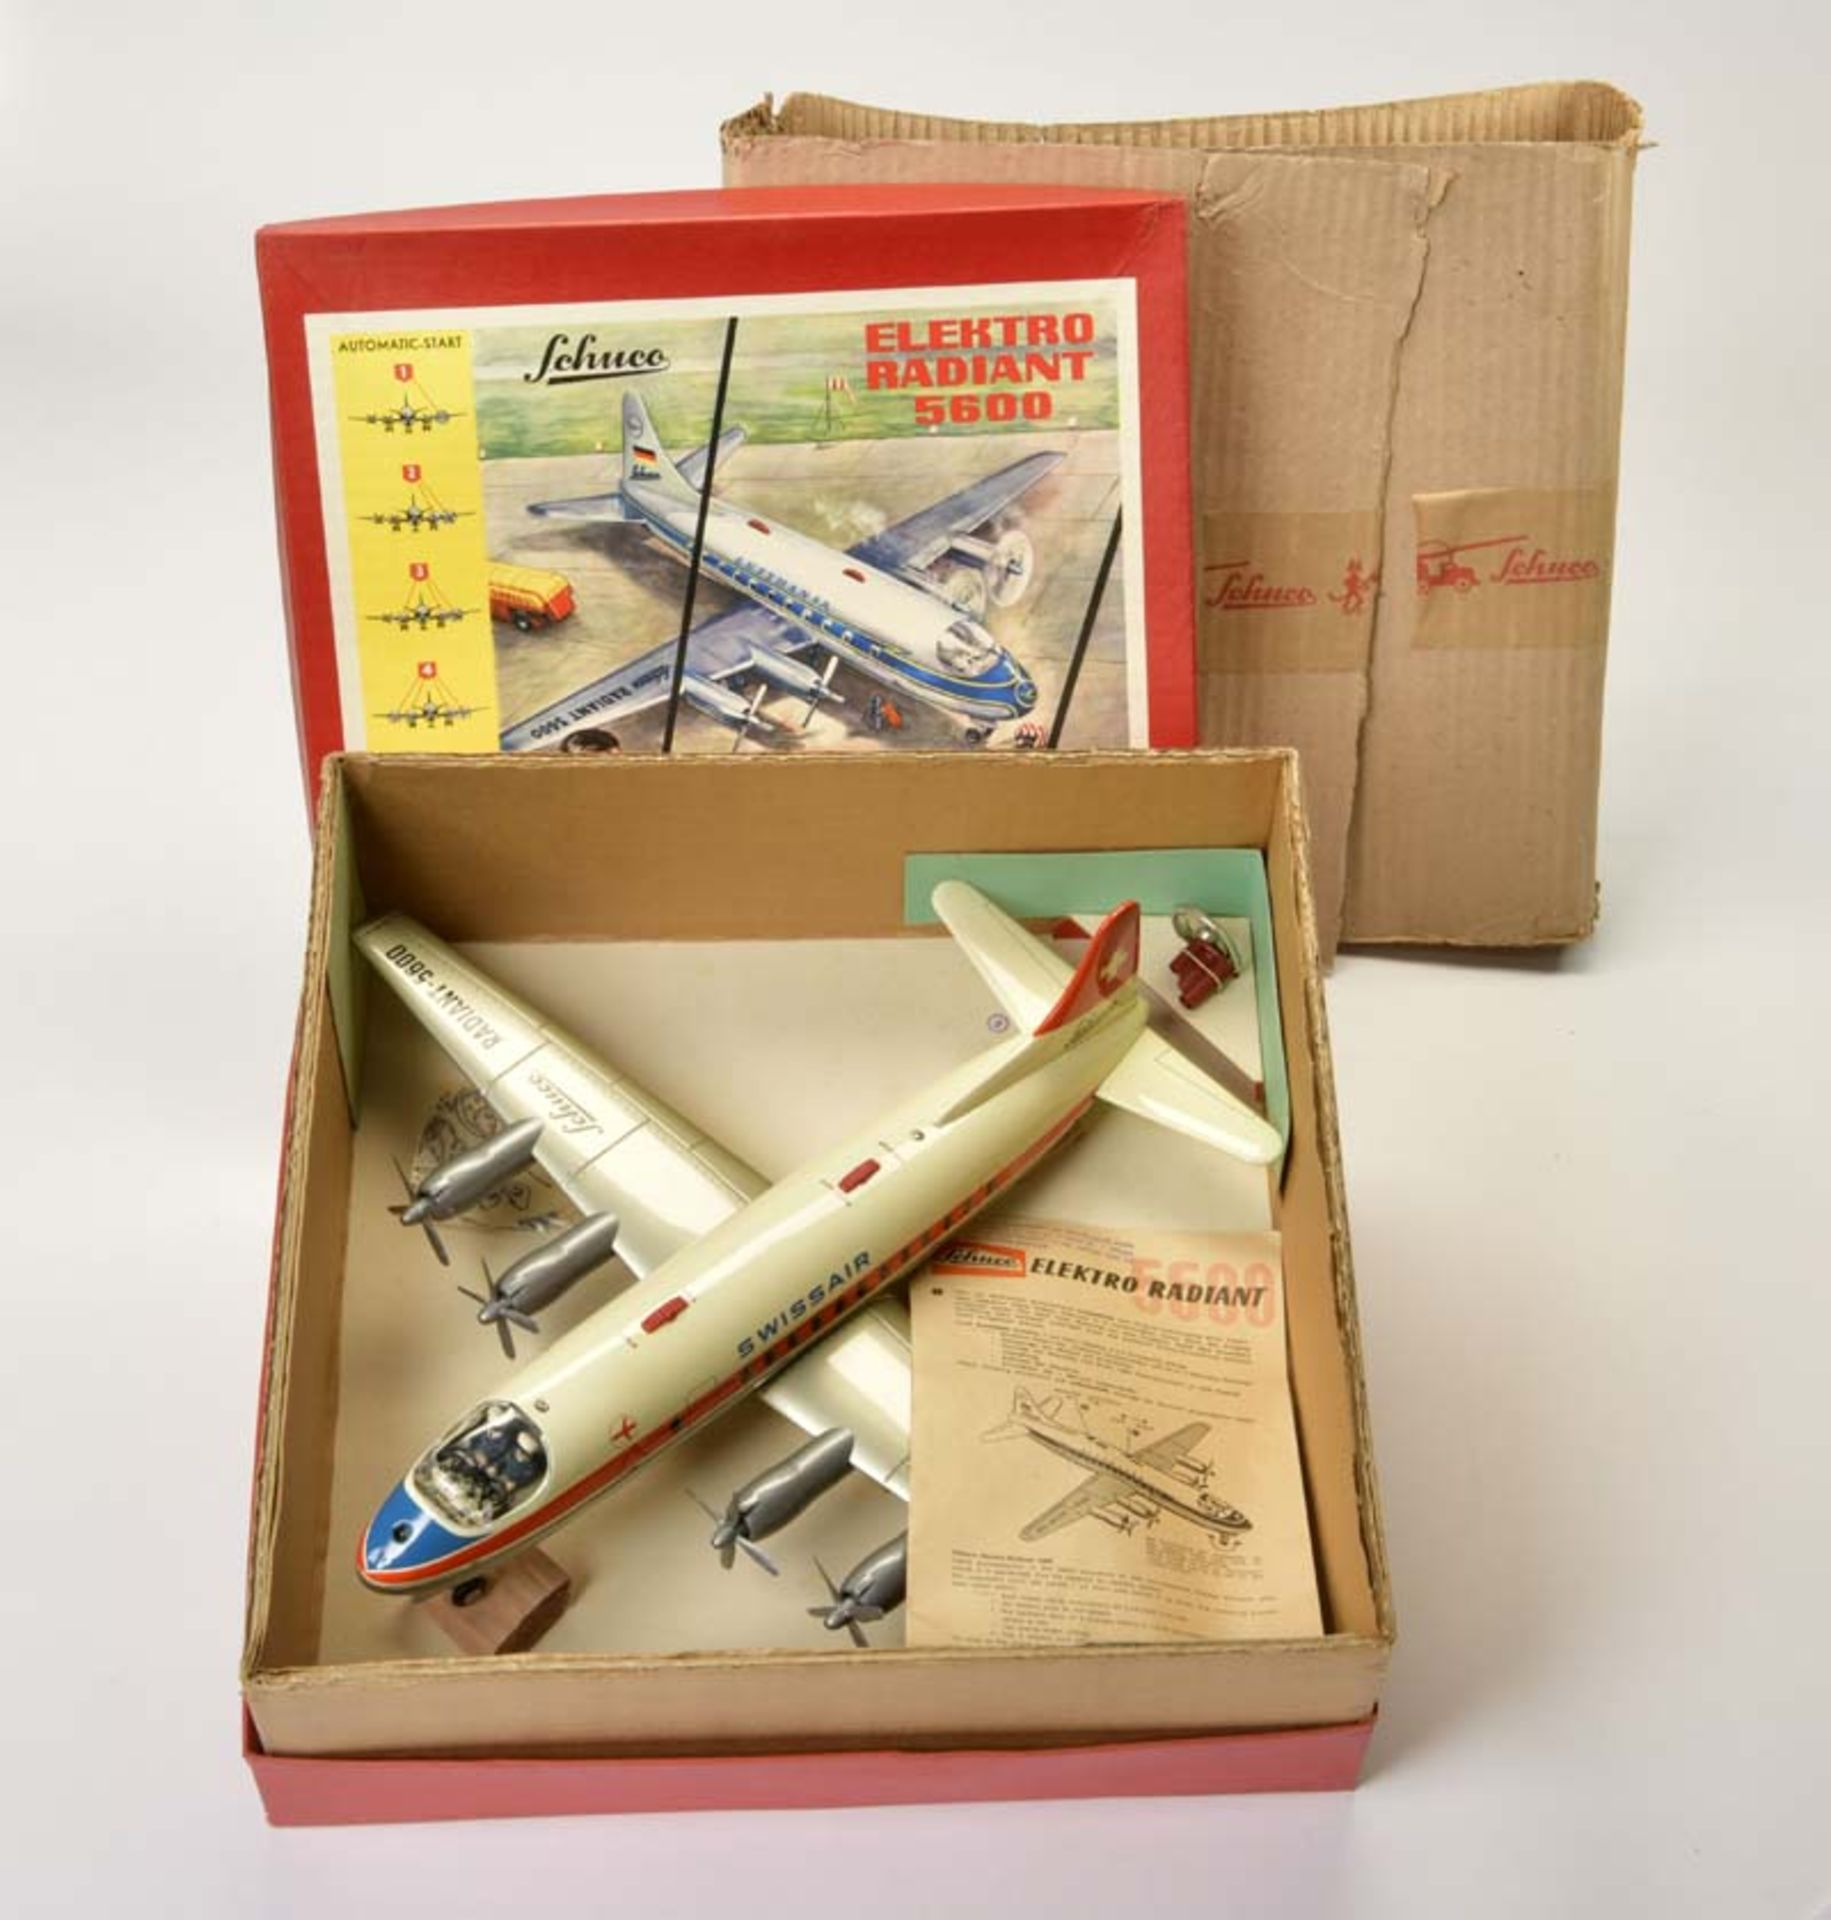 Schuco, Swissair Elektro Radiant 5600, W.-Germany, box C 1, complete with accessories + paper +